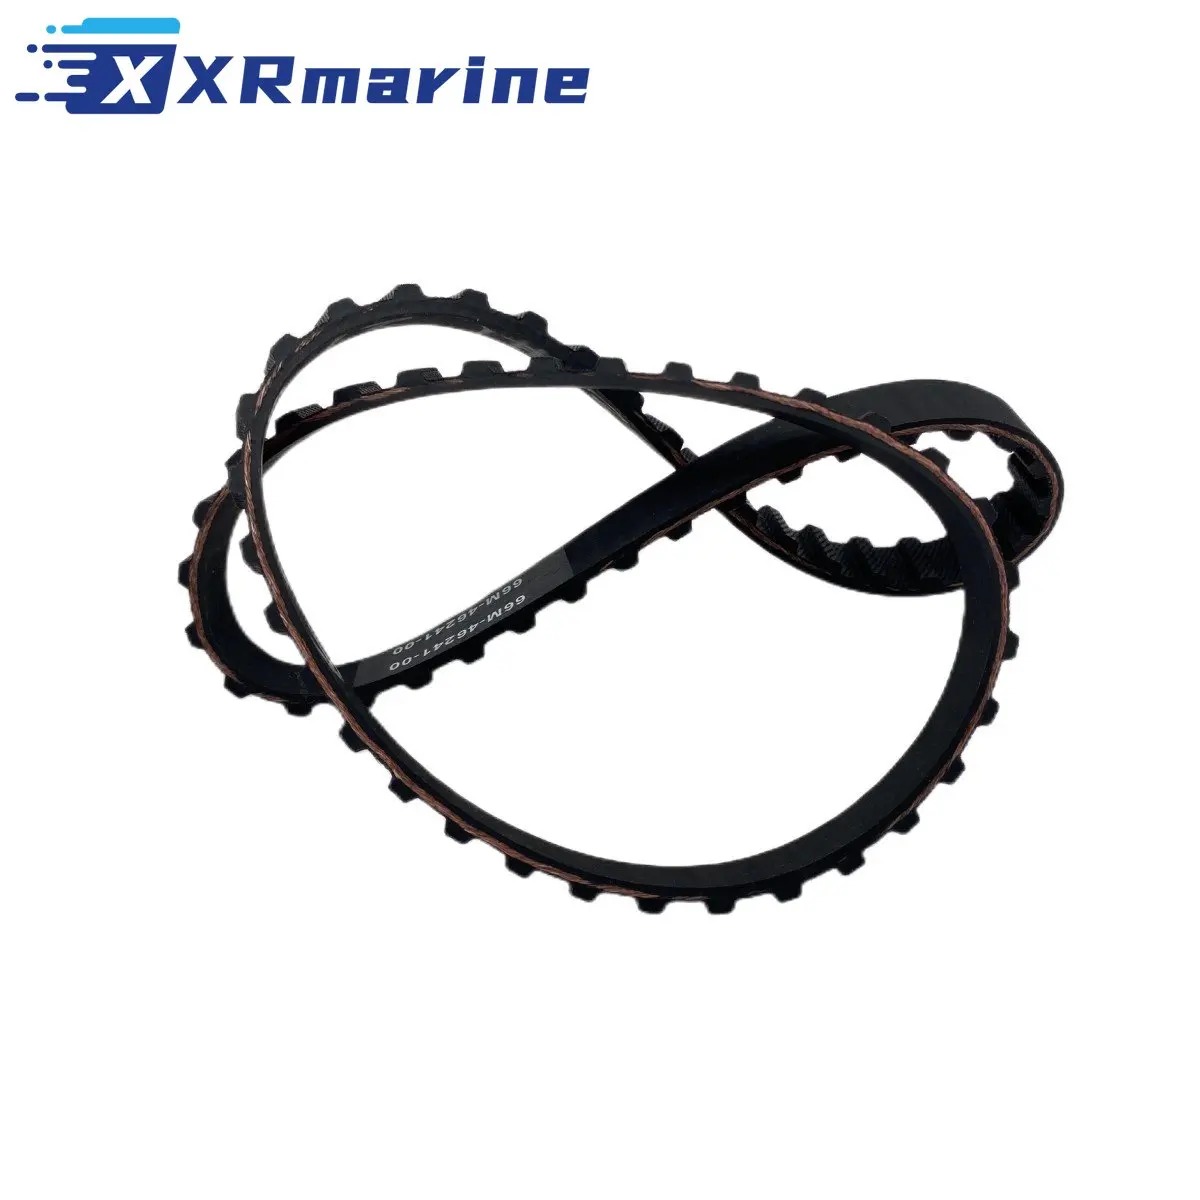 3H8-10061-0 Pulley Timing Belt for Tohatsu 4 Stroke 9.9HP 15HP 18HP 20HP Outboard Motors 3H8100610 3H8100610M 18-15147